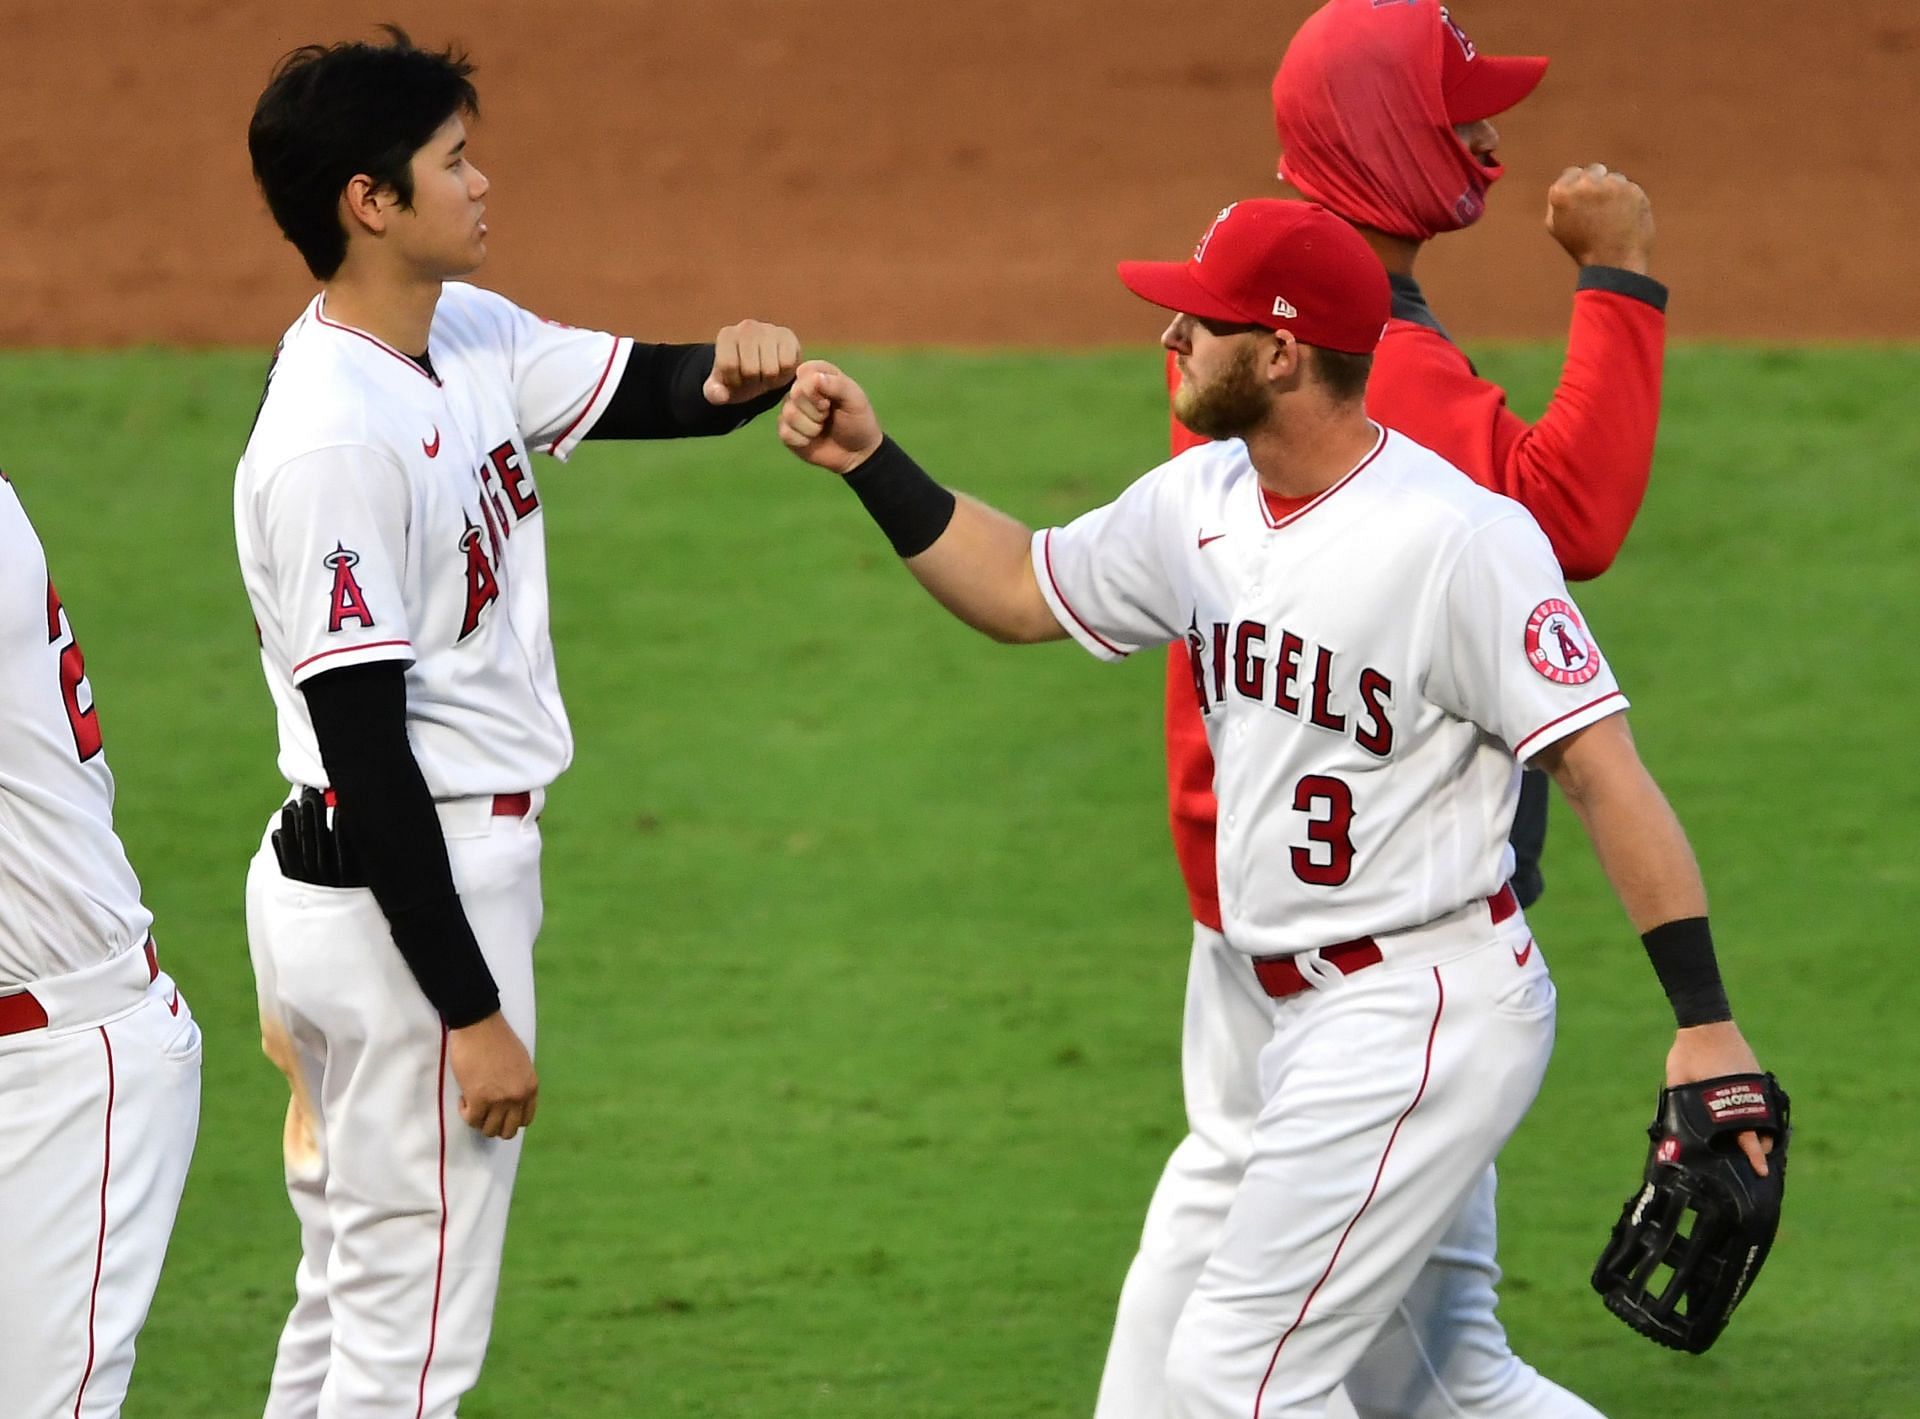 Taylor Ward bumped Angels superstar Shohei Ohtani in the order for the lead spot